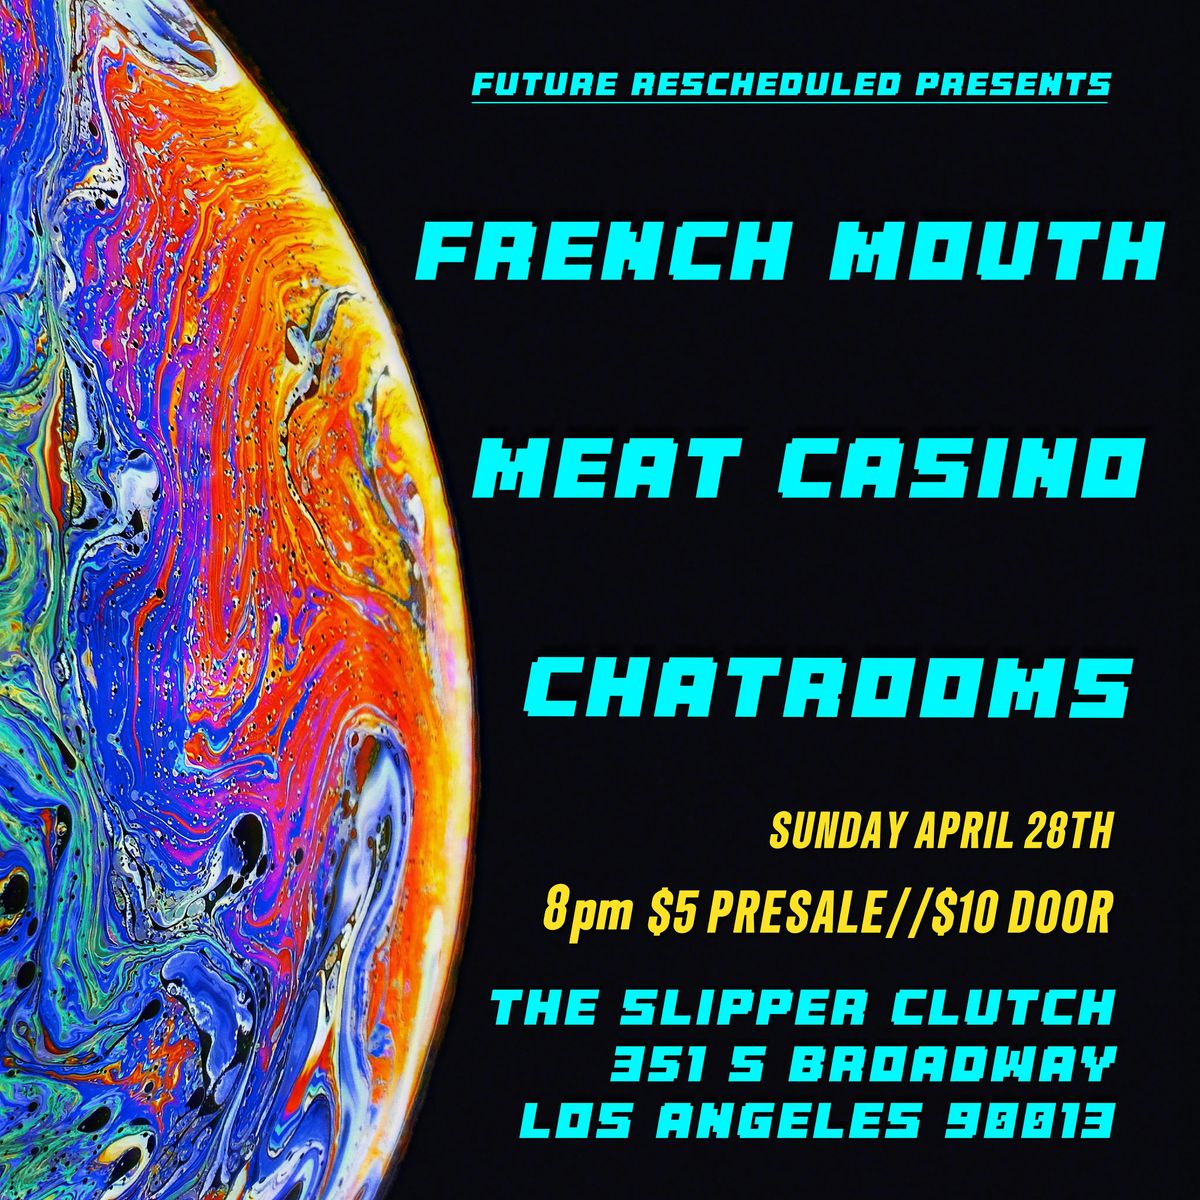 French Mouth + Meat Casino + Chatrooms LIVE  at The Slipper Clutch